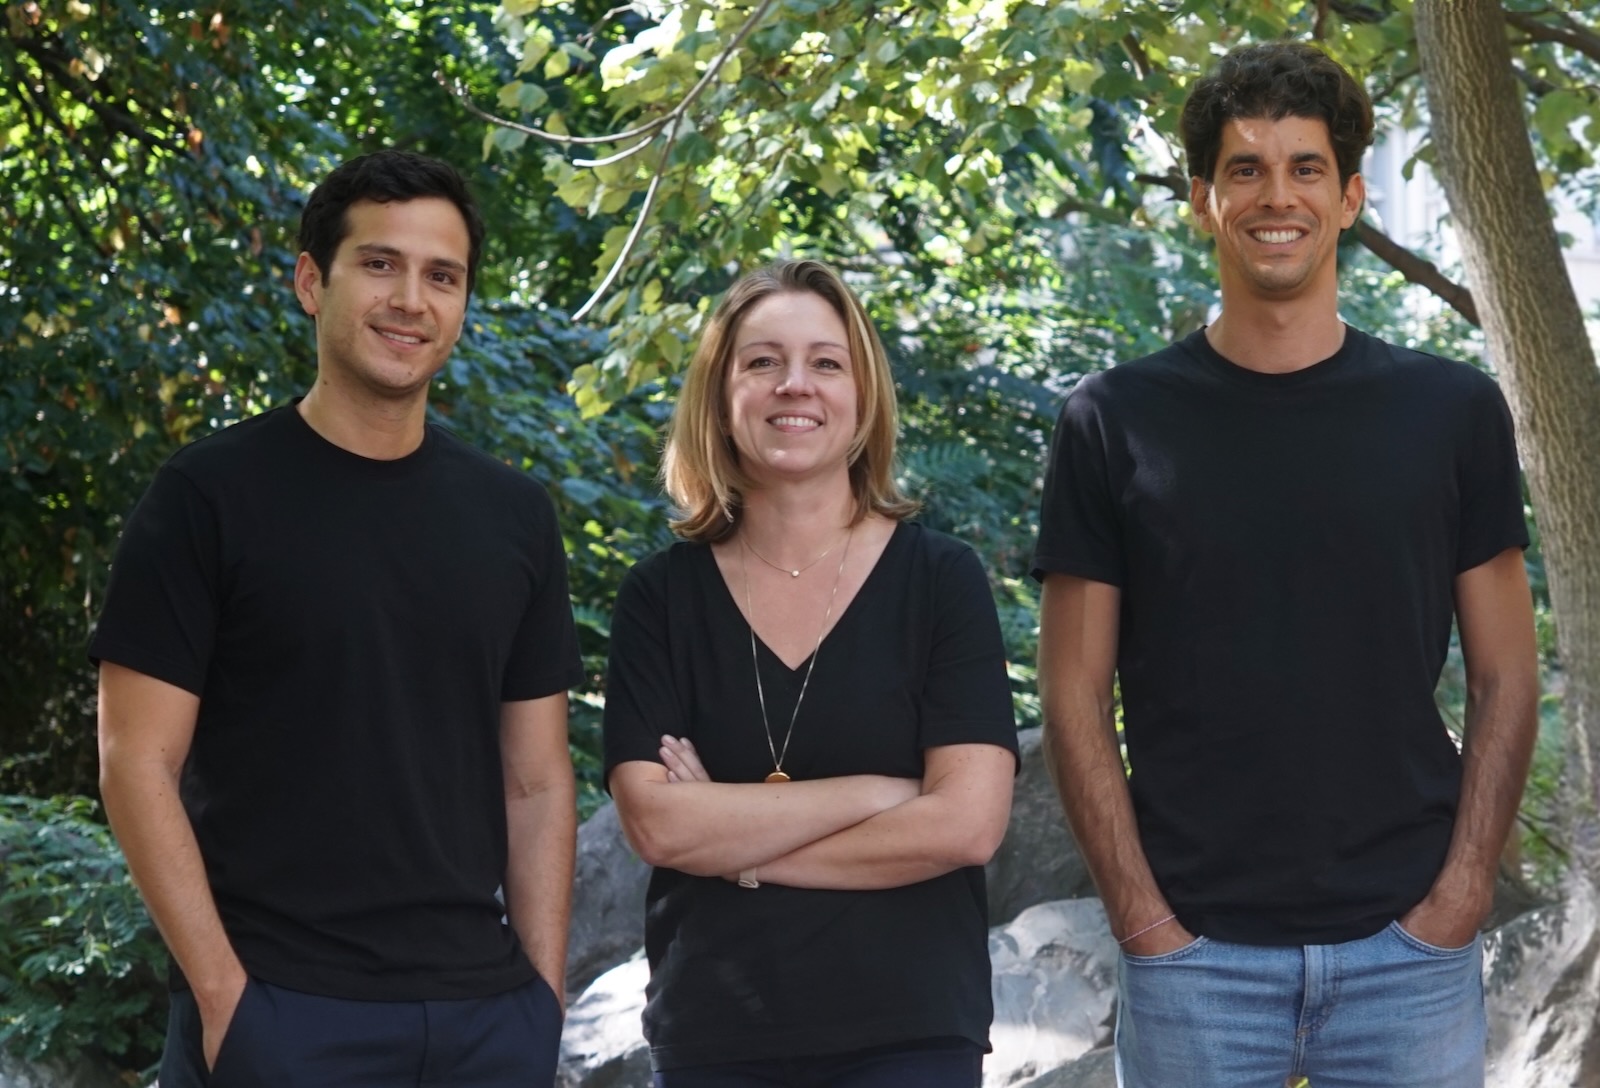 BlueLayer Raises €9.2M in Seed and Pre-Seed Funding Rounds